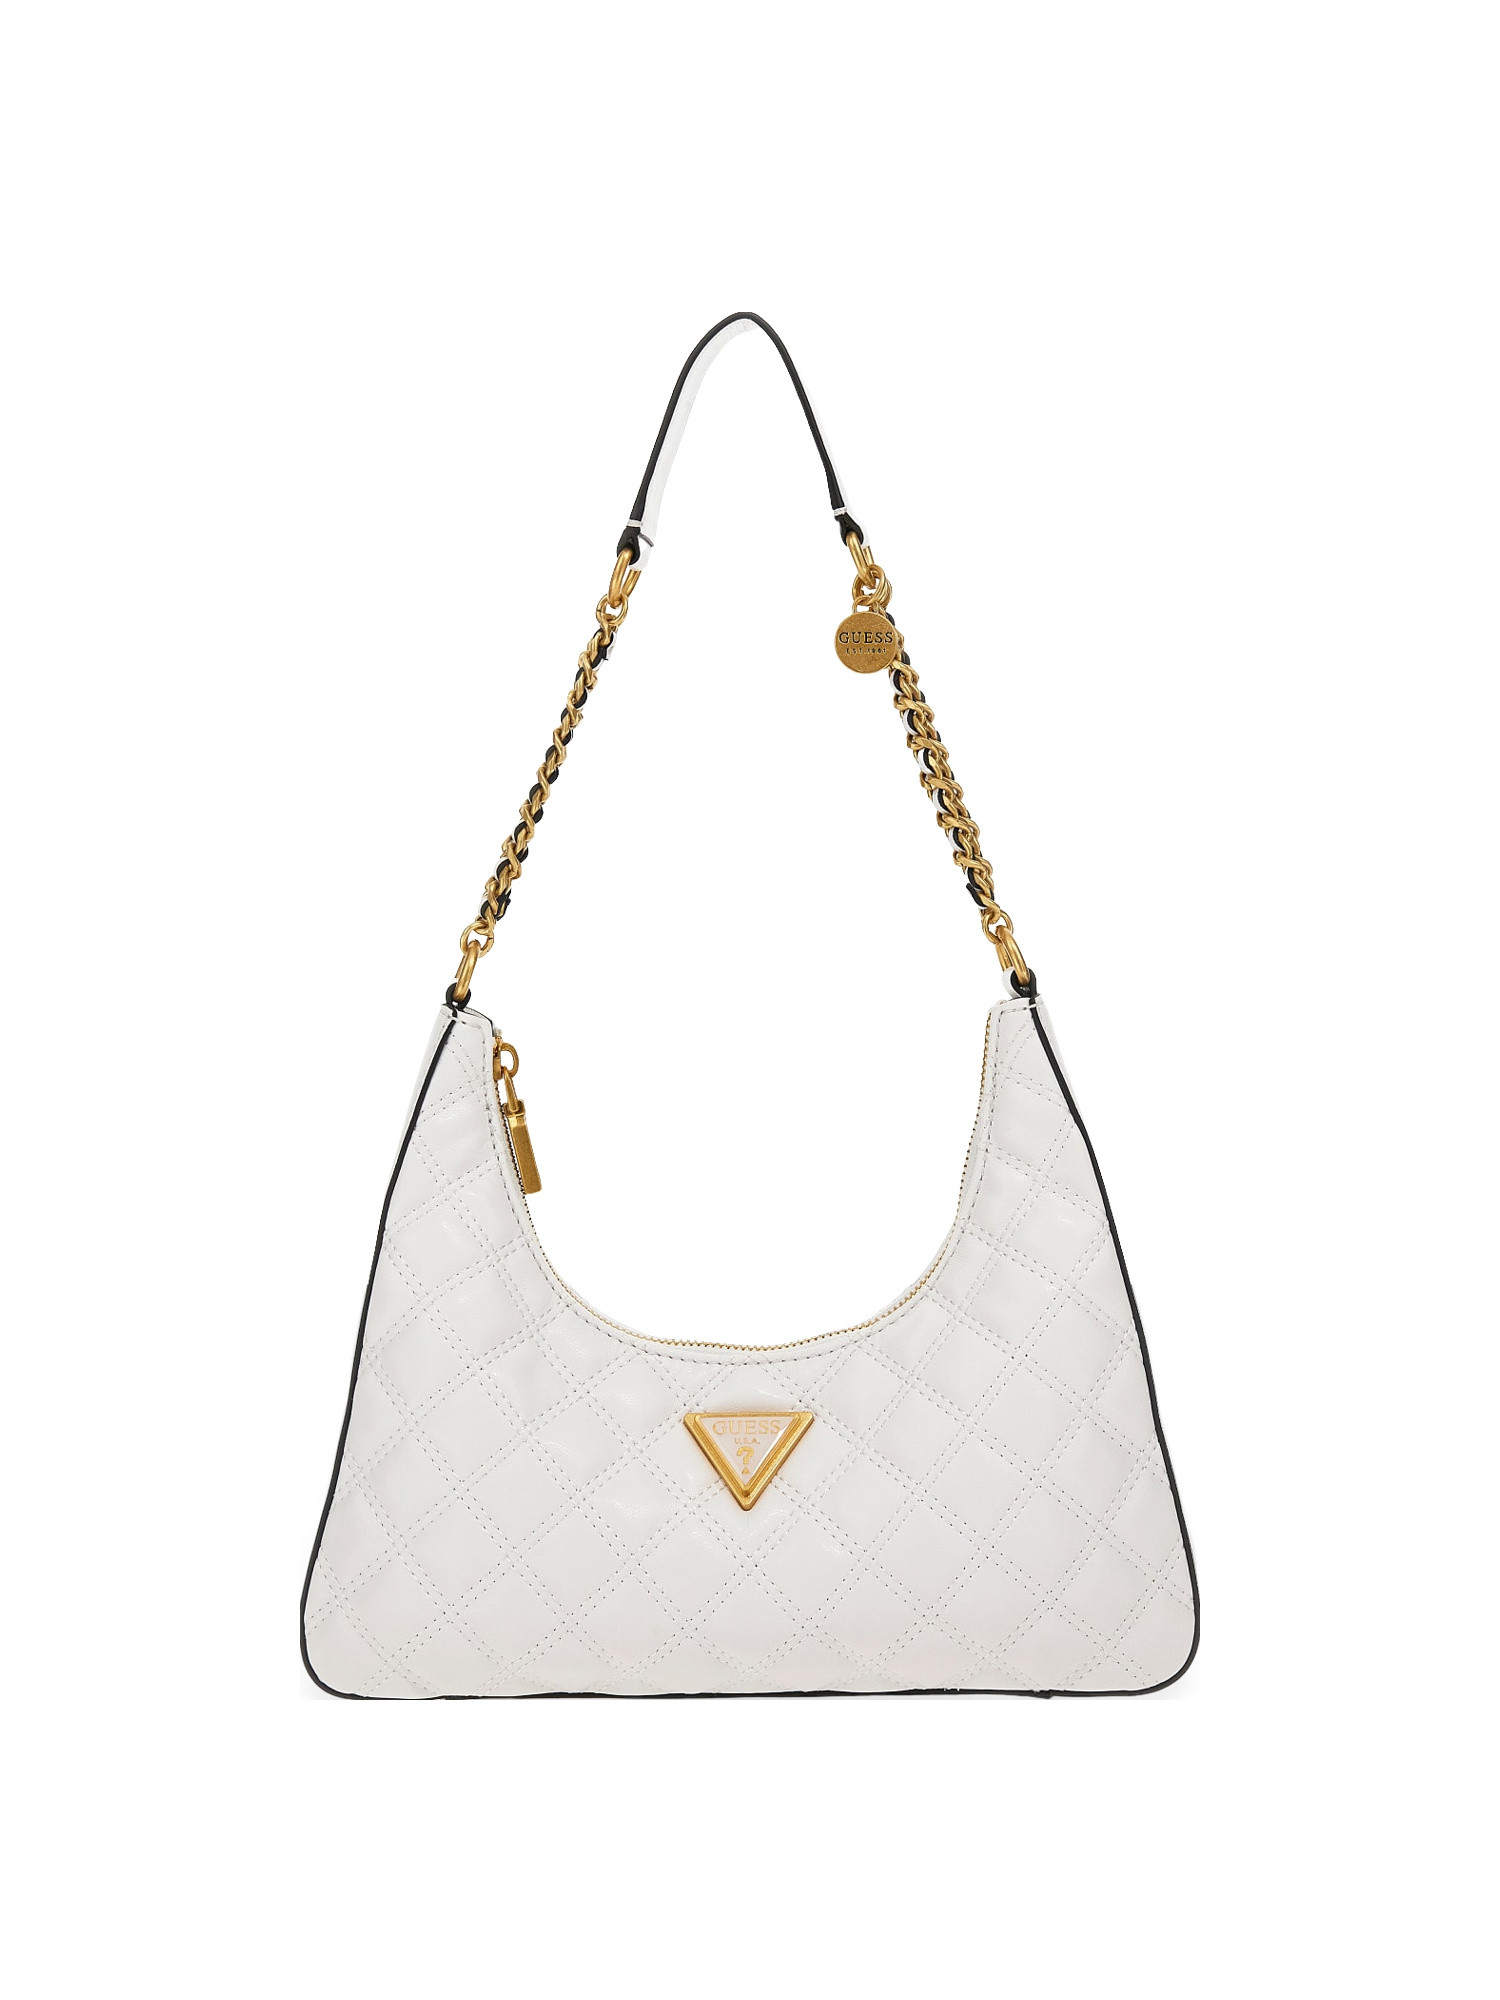 Guess - Borsa a spalla Giully, Bianco, large image number 0